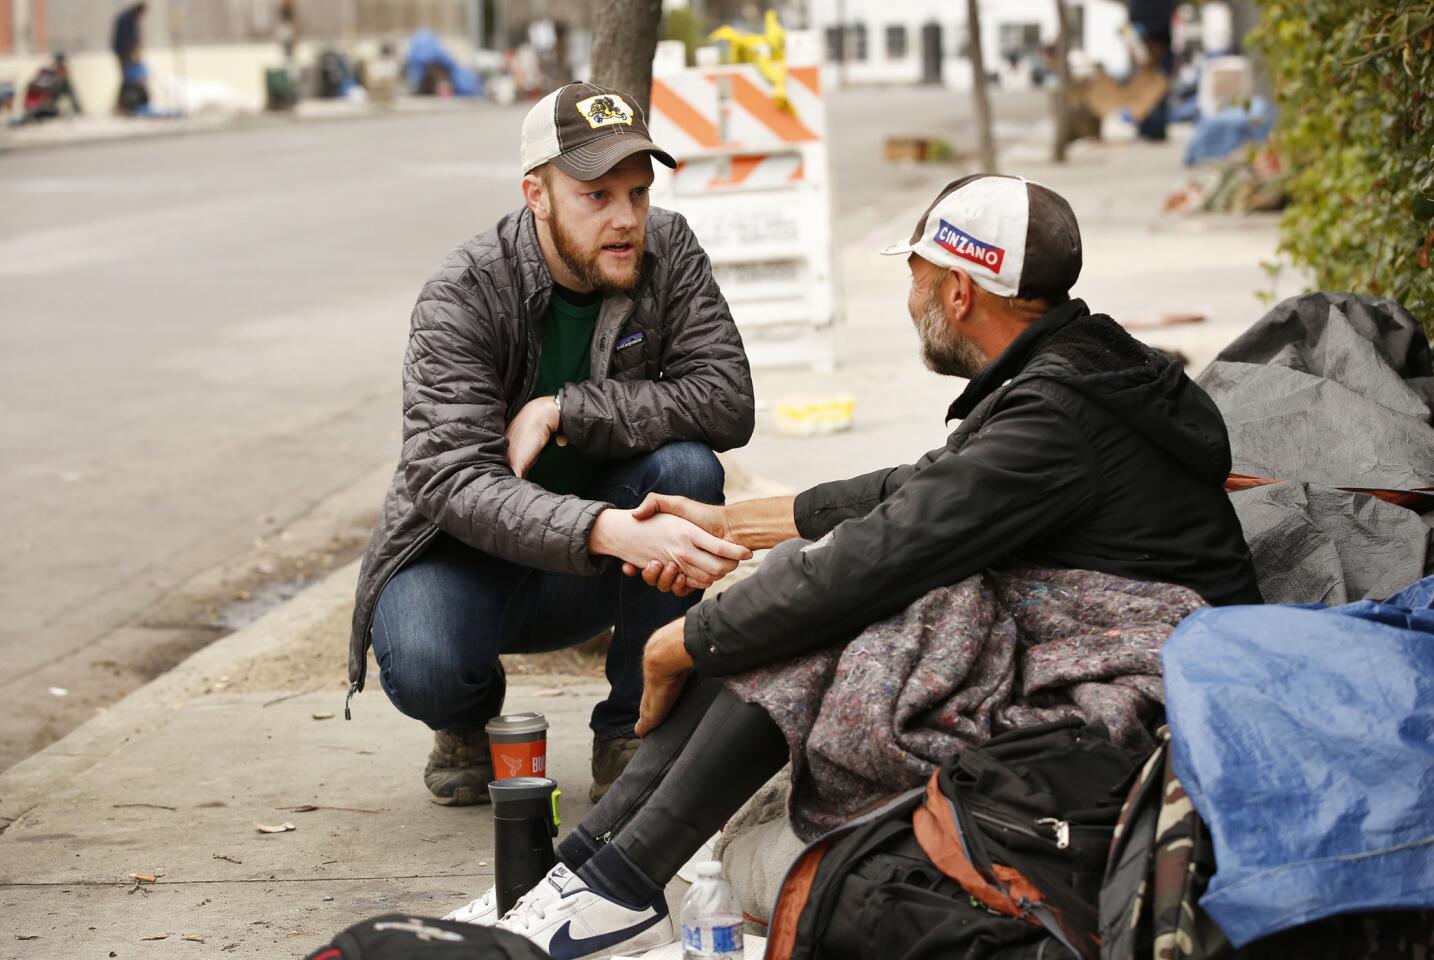 Stephen Butler, left, of the St. Joseph Center talks with Jack on a sidewalk on Rose Avenue in Venice. St. Joseph is leading what is called a C3 outreach team offering services to the homeless.